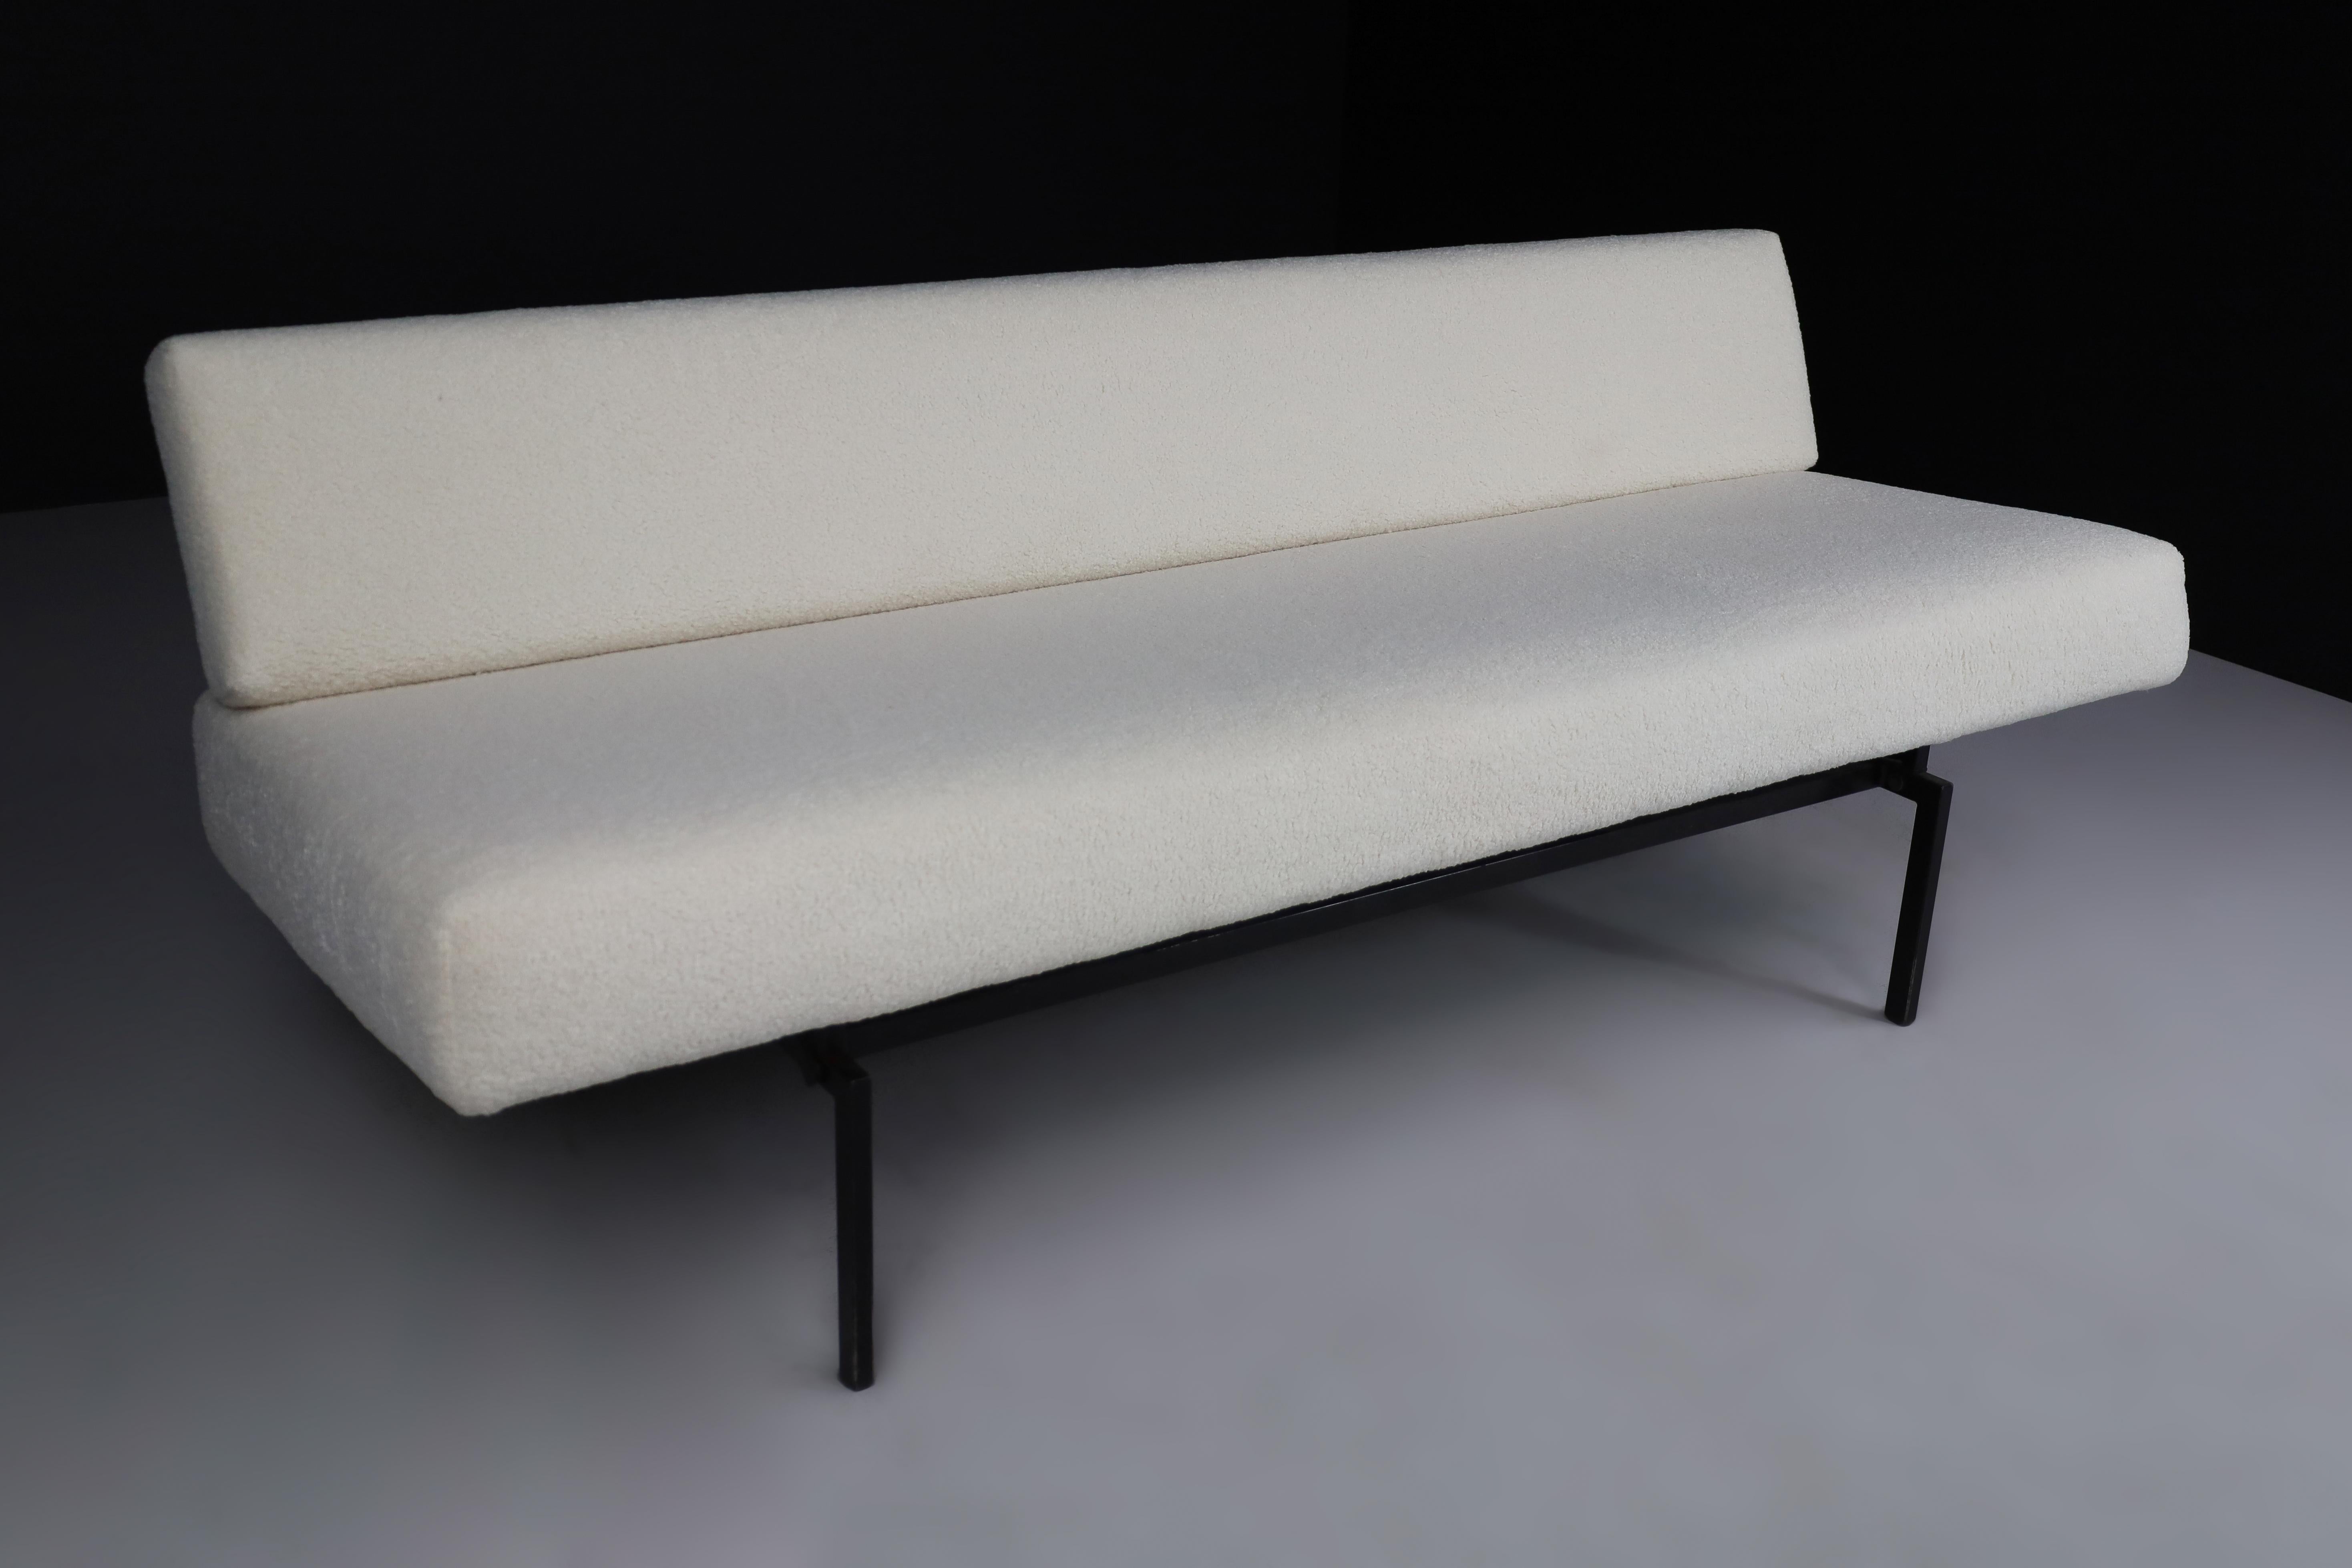 Mid-20th Century Martin Visser Sofa or Sleeper Sofa for 't Spectrum in New Teddy Fabric, 1960s For Sale